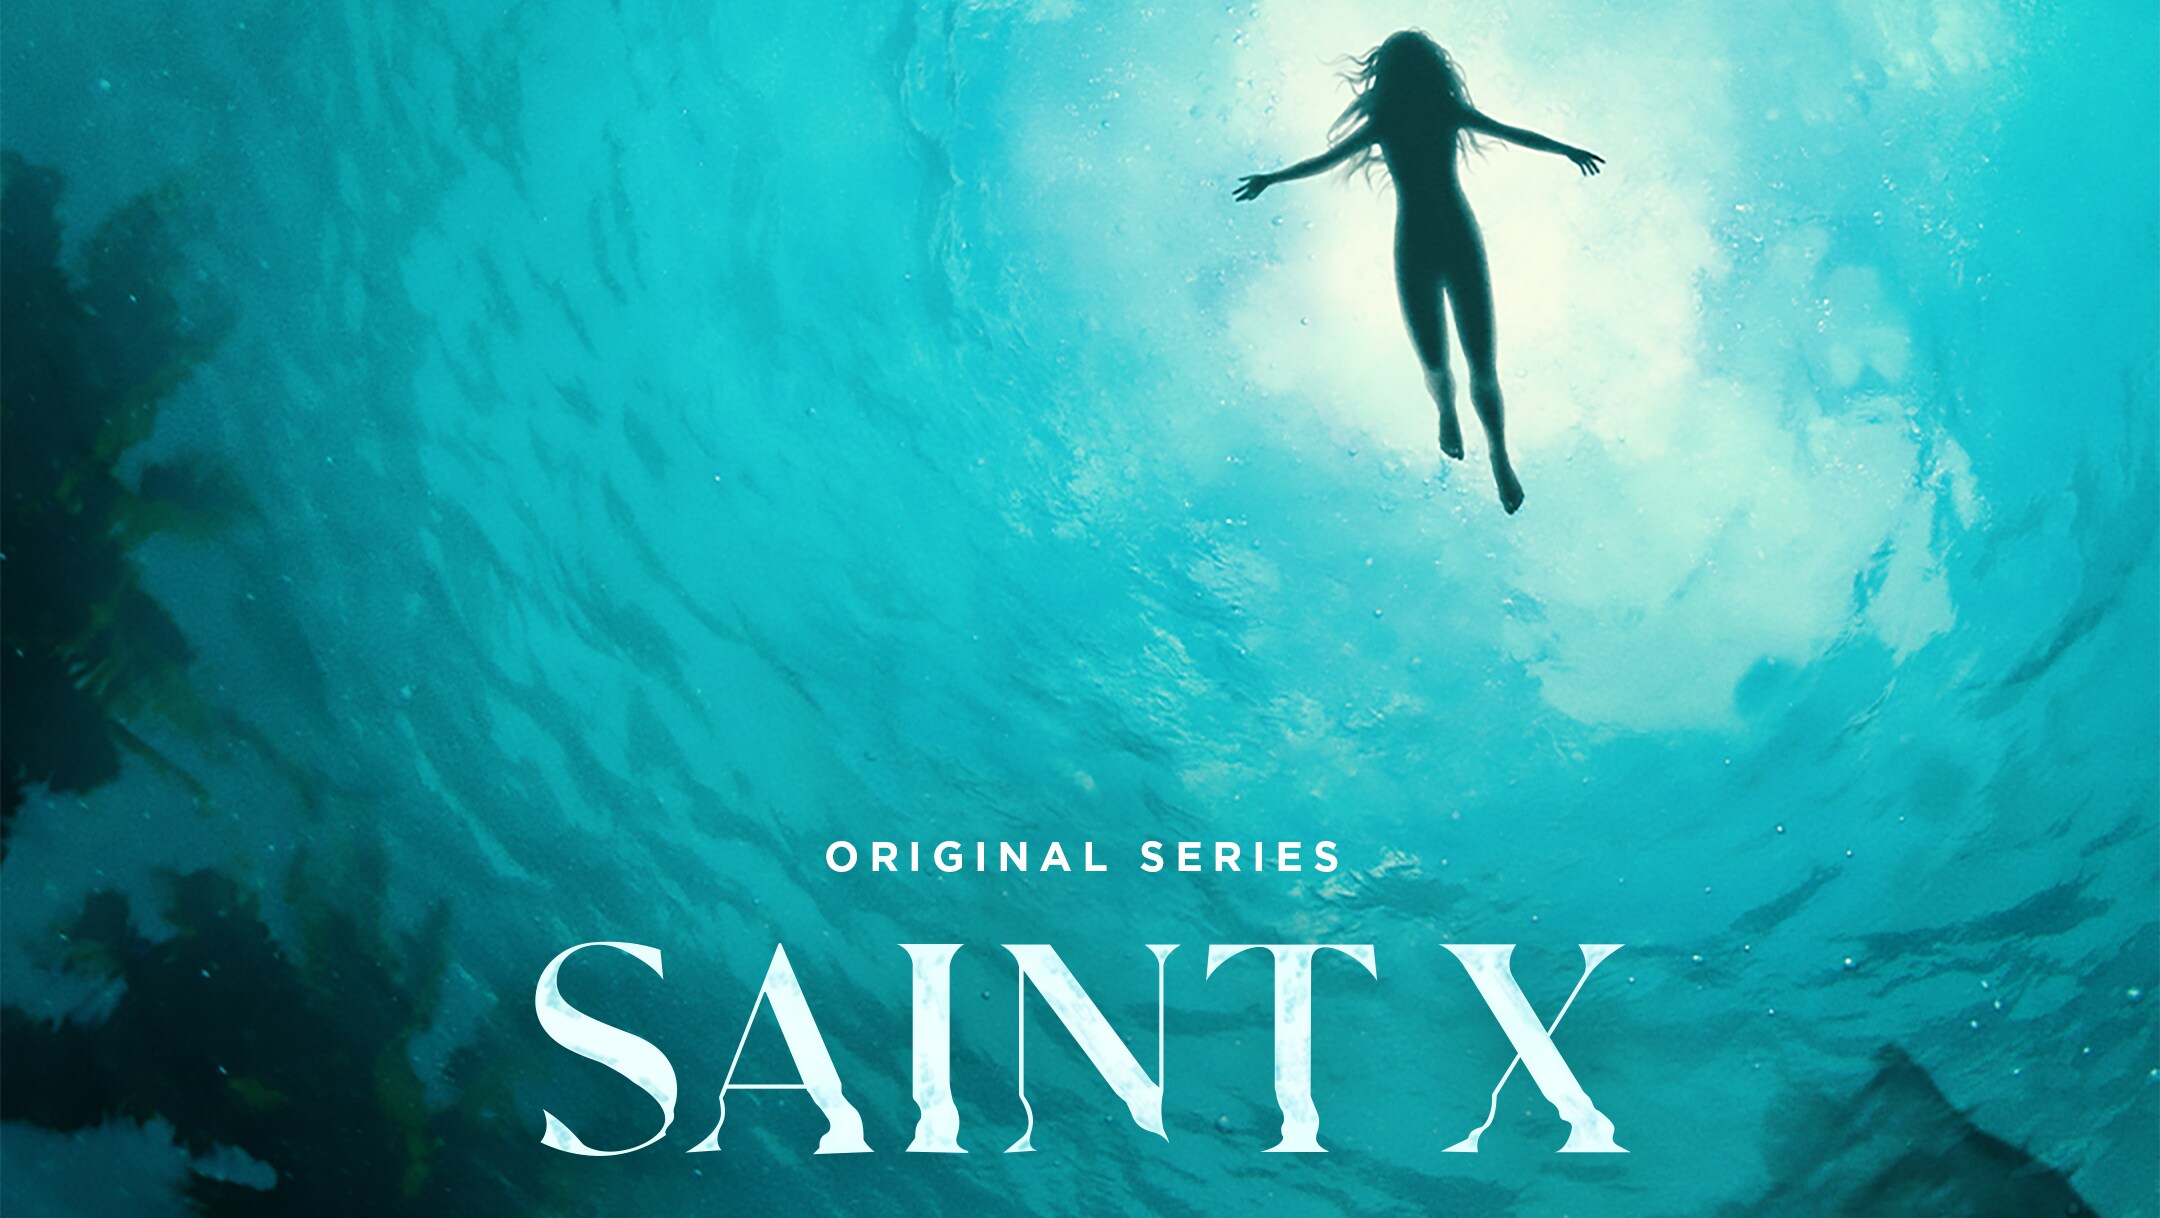 OFFICIAL TRAILER AND KEY ART UNVEILED FOR ORIGINAL SERIES “SAINT X” PREMIERING 7 JUNE ON DISNEY+ IN THE U.K.